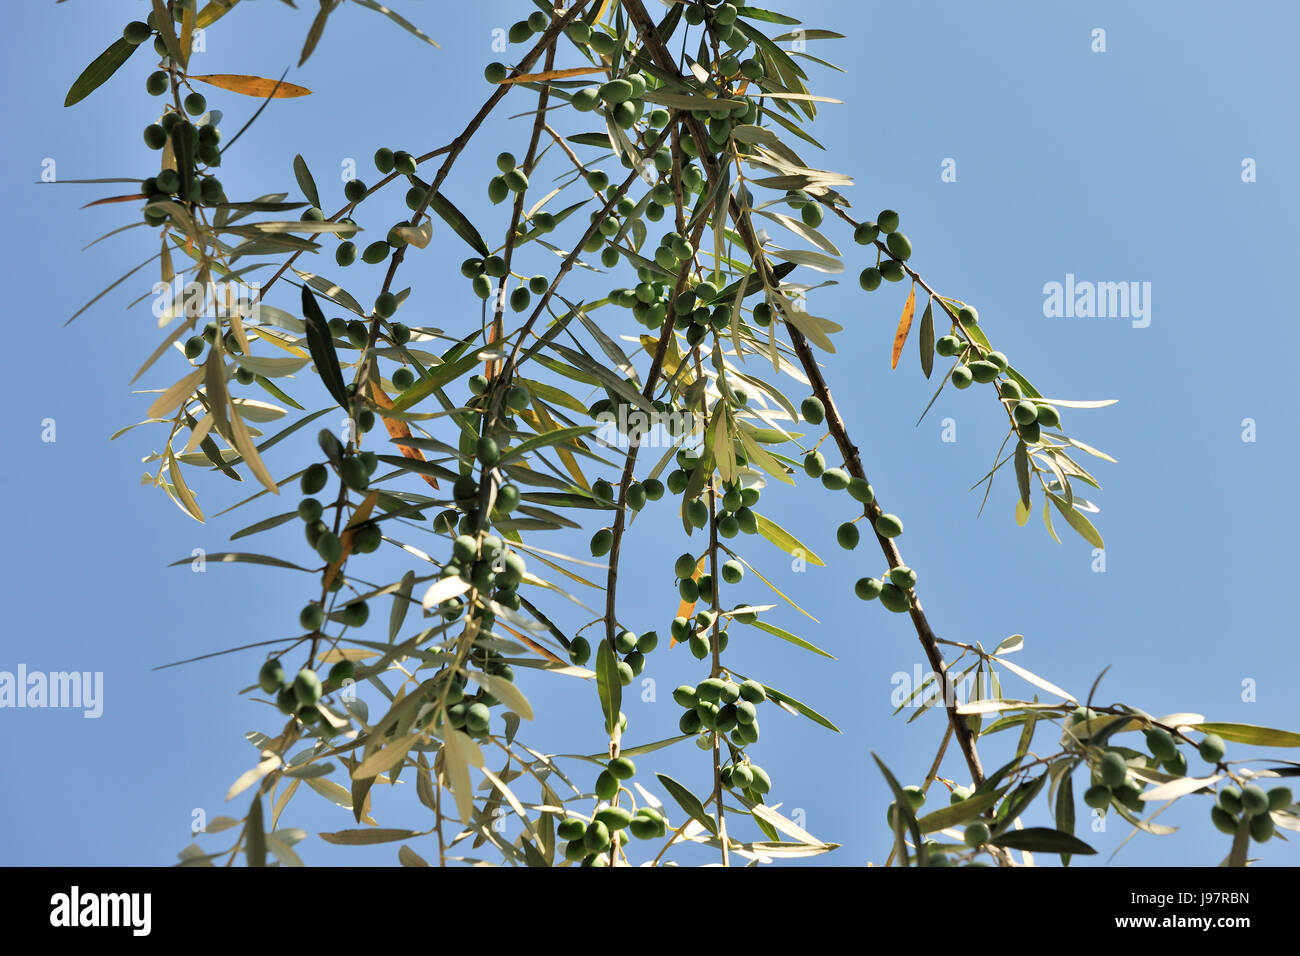 Olives in an olive tree. Douro region, Portugal Stock Photo